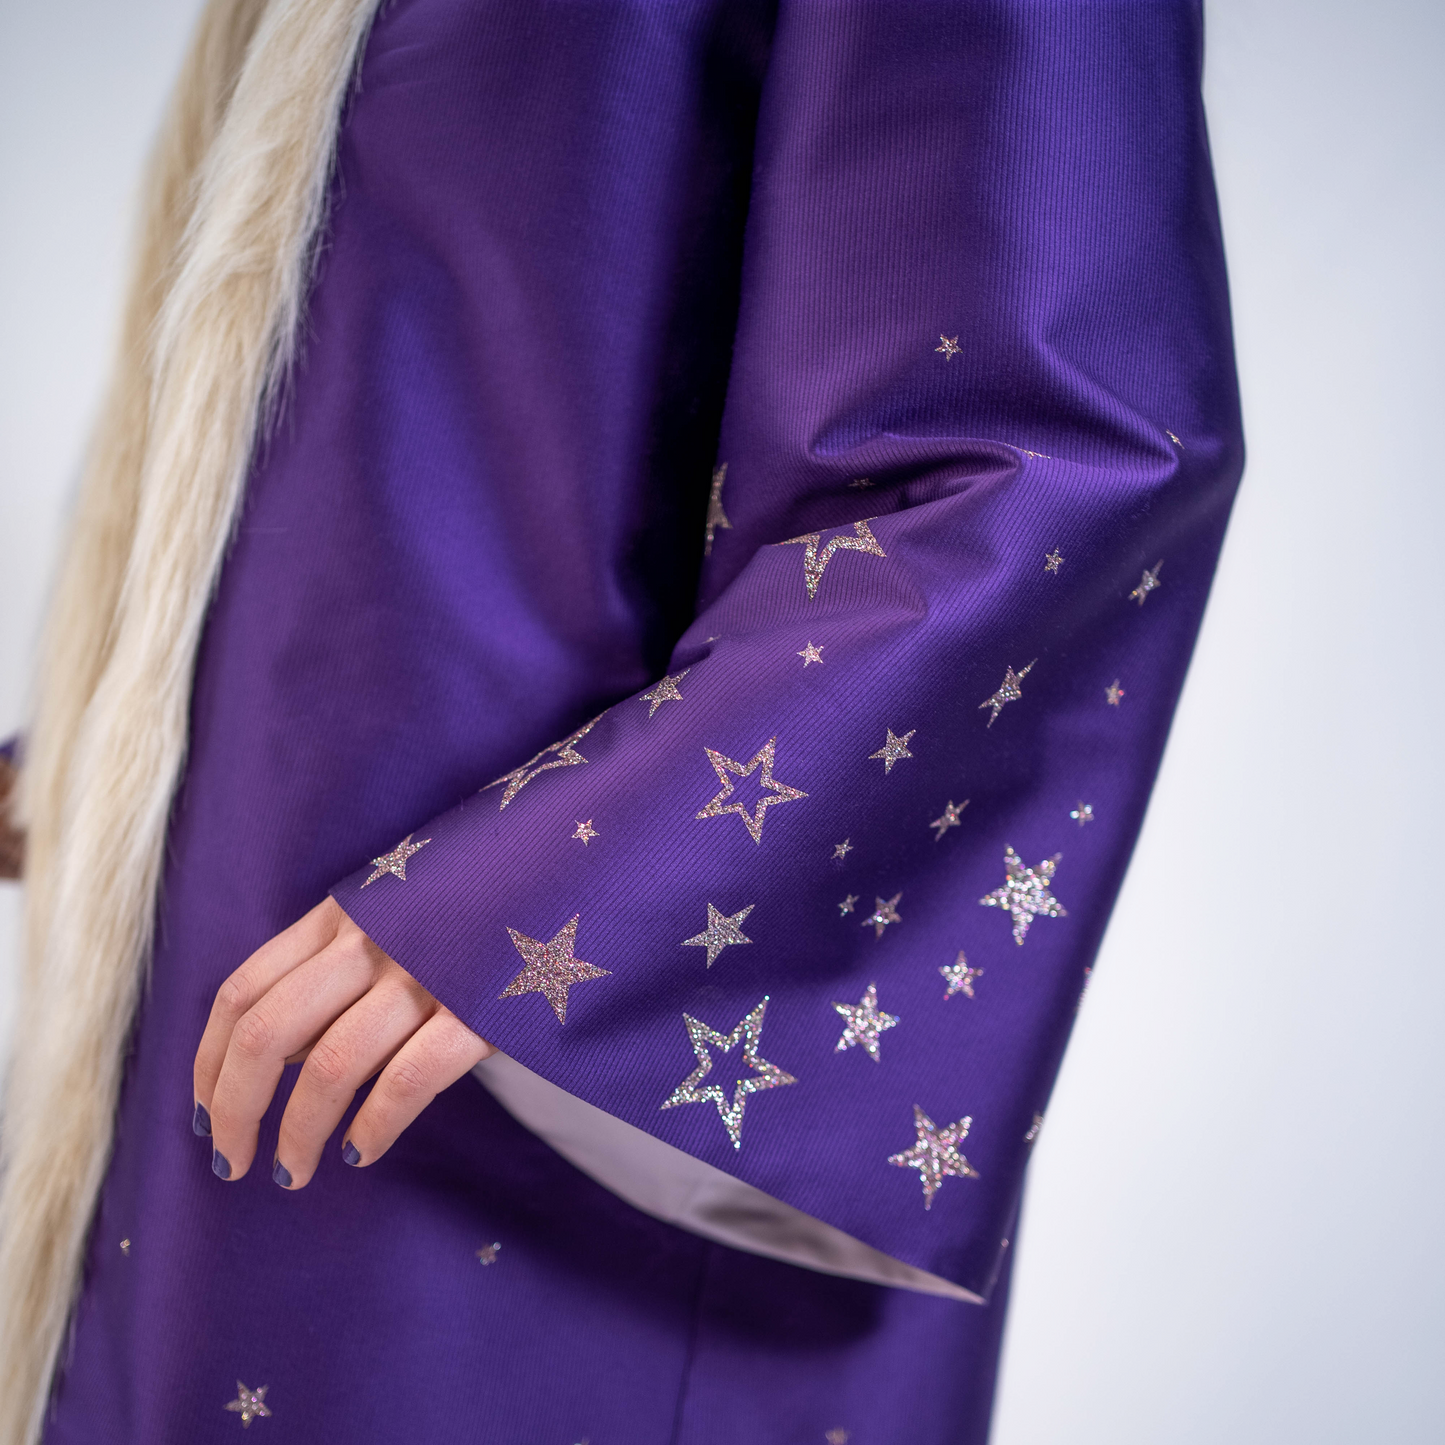 Mage Coat Cosplay Costume Sewing Pattern/Downloadable PDF File